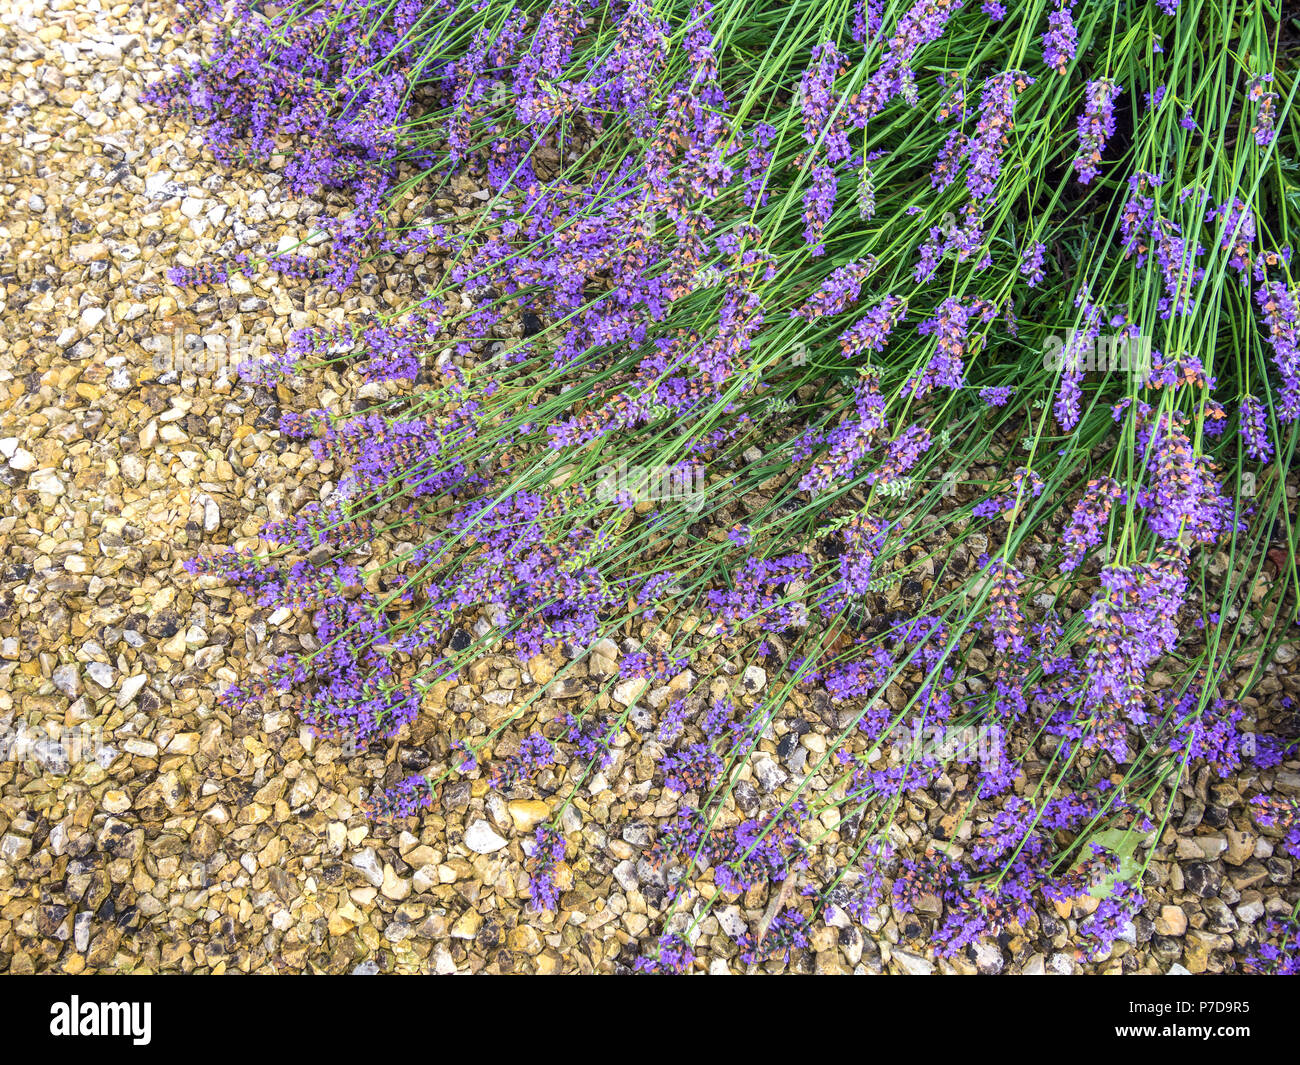 Flowering Lavender against ground after heavy rain. Stock Photo